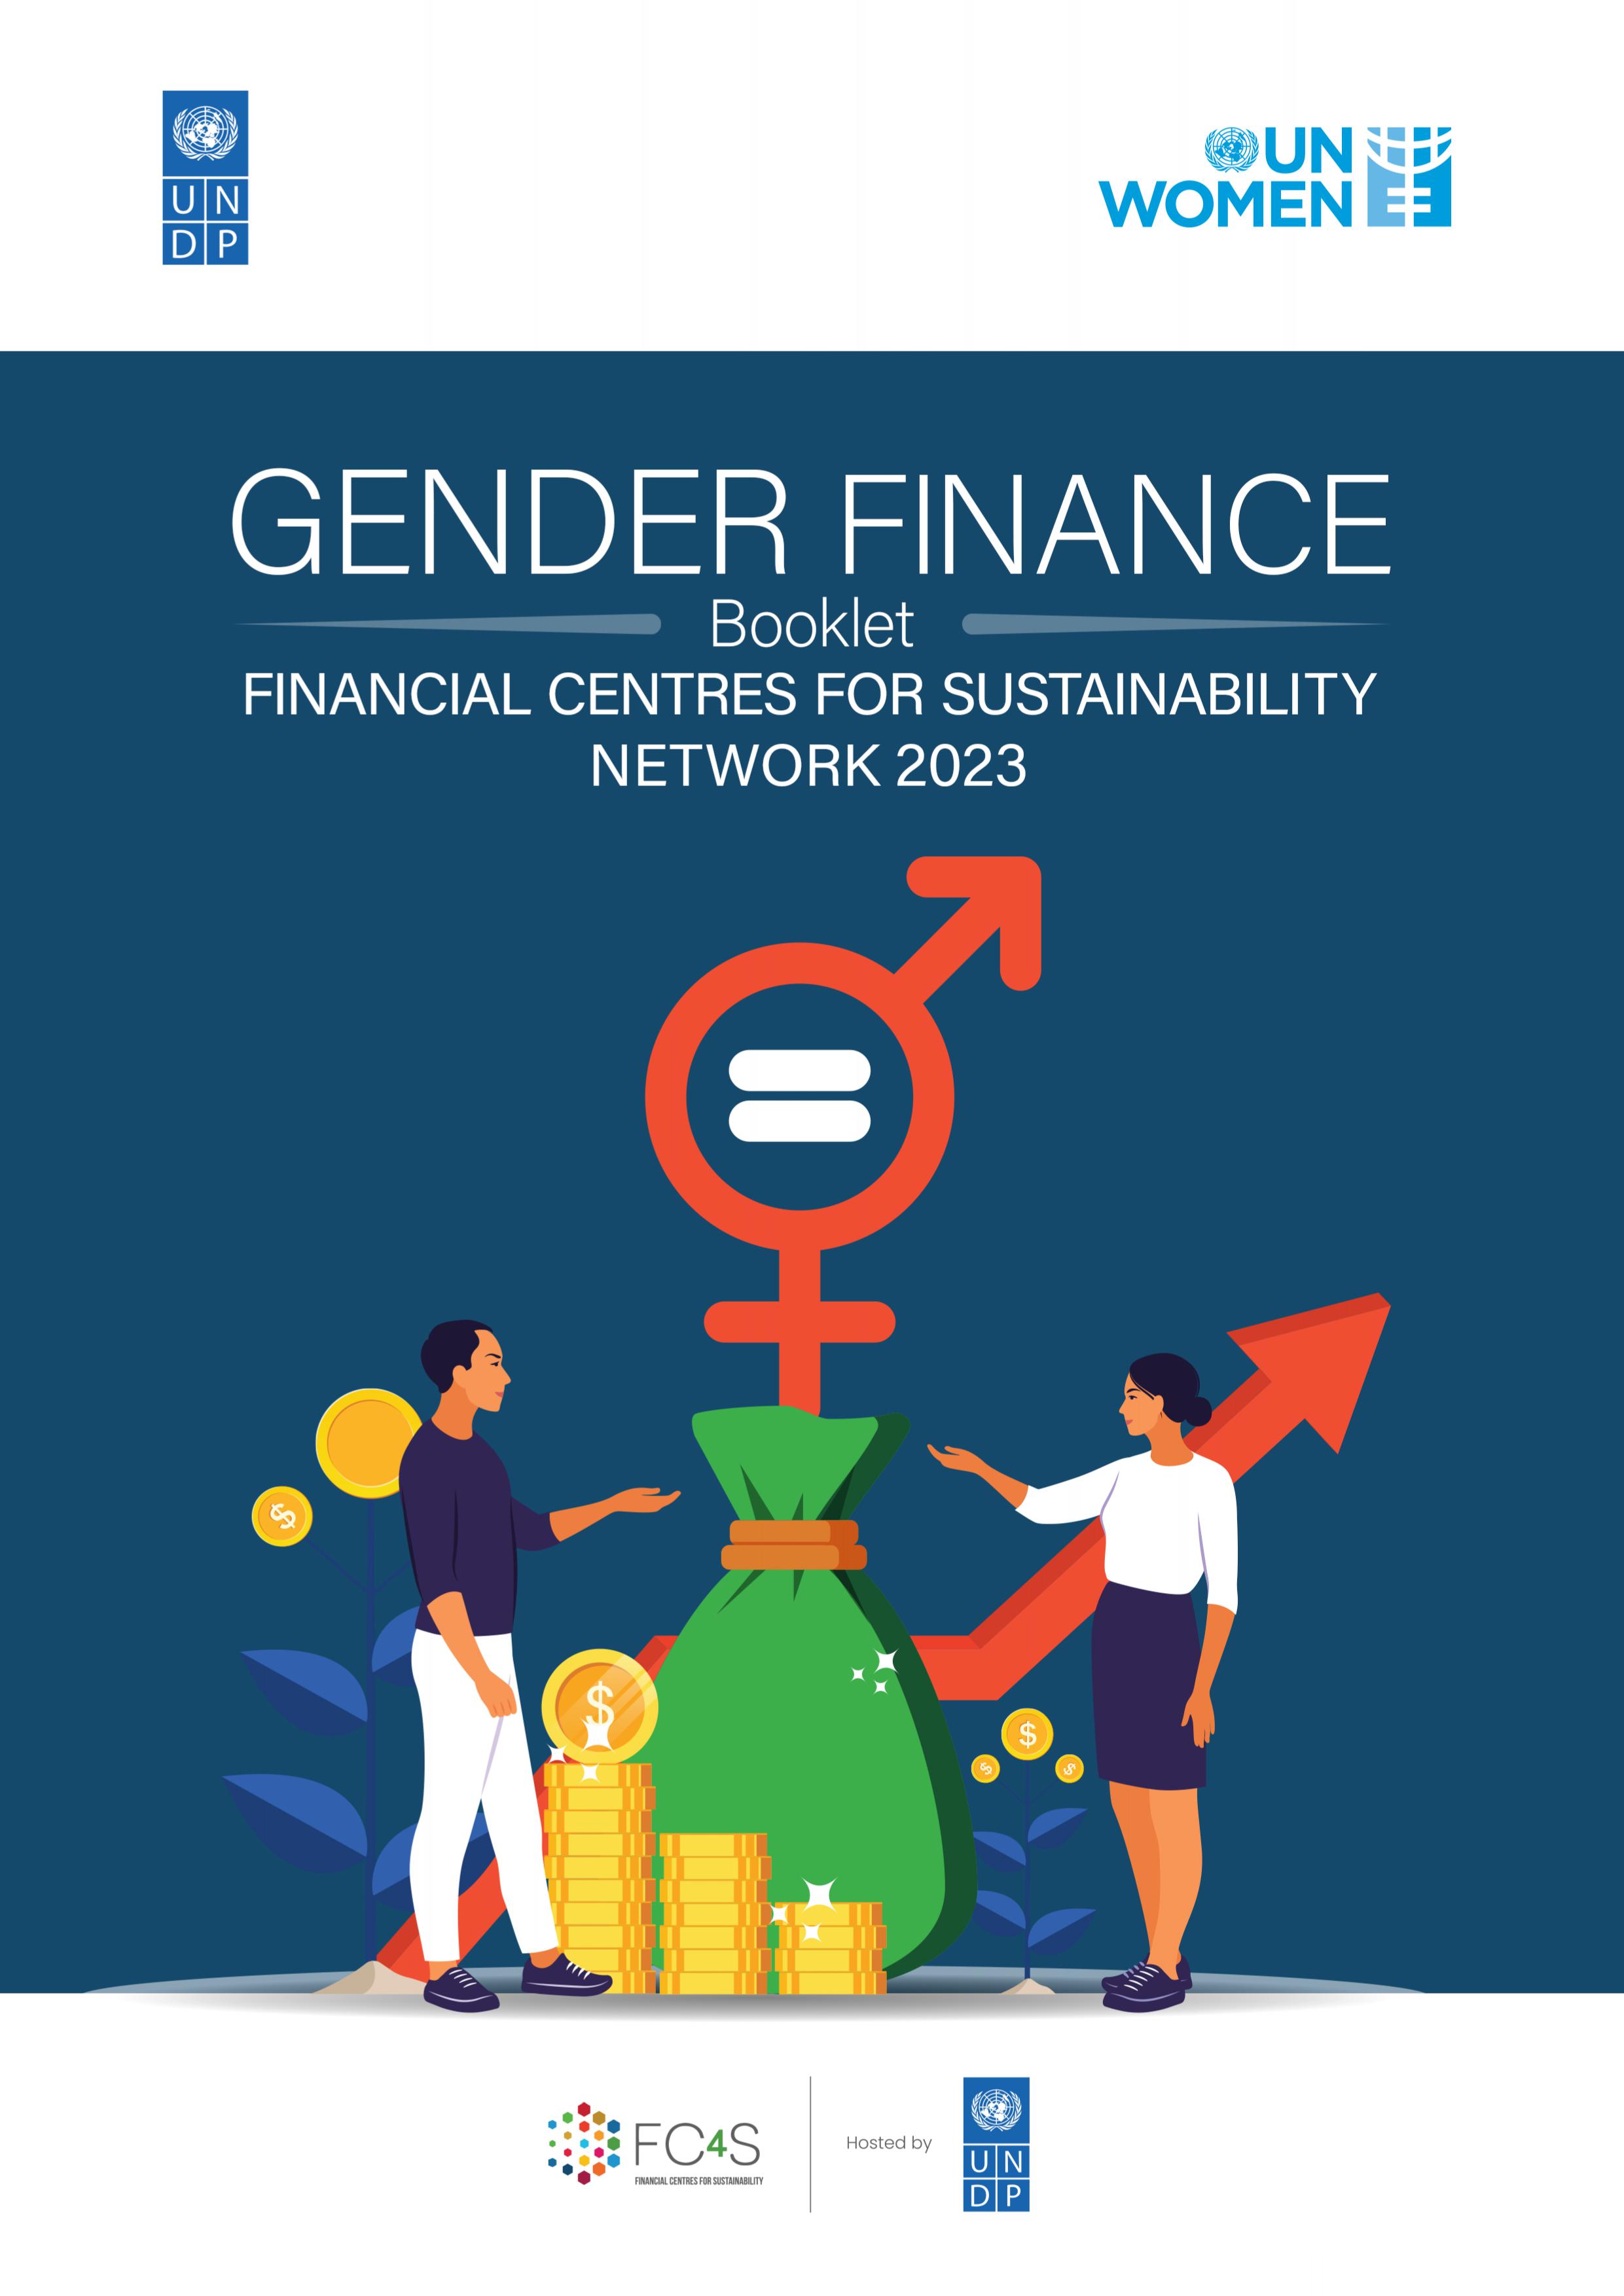 Gender Finance Booklet, Financial Centers for Sustainability Network 2023